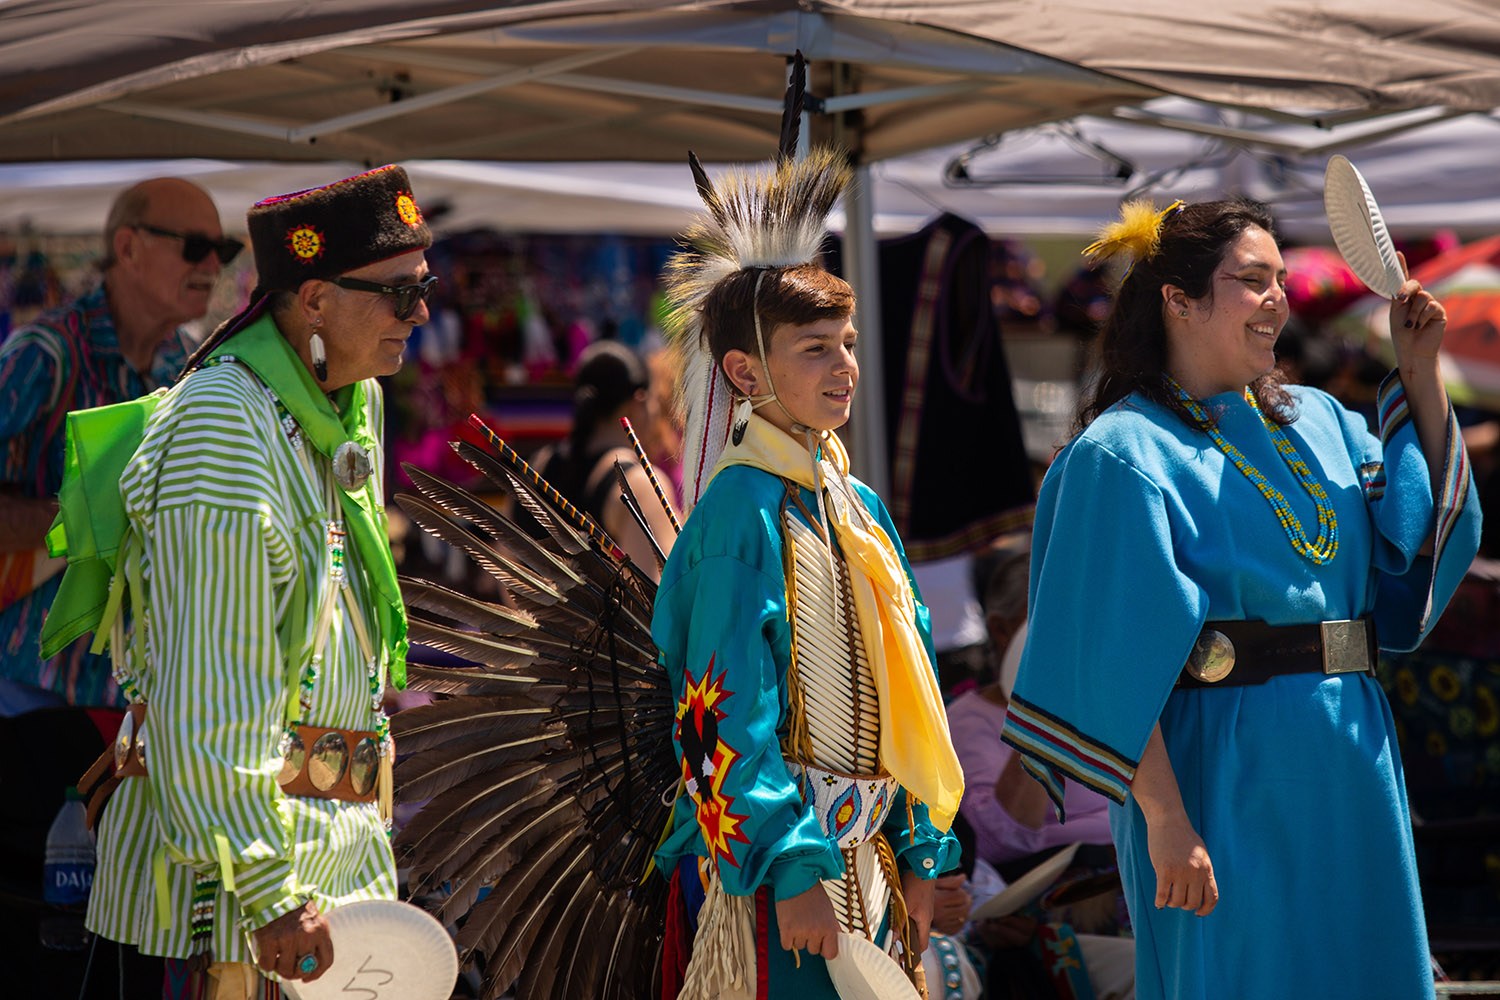 Dozens attended a Native American Fiesta Pow Wow on Saturday afternoon, April 2, 2022, at Mission County Park #2, San Antonio, Texas. Photo by Kaylee Greenlee Beal | Heron contributor